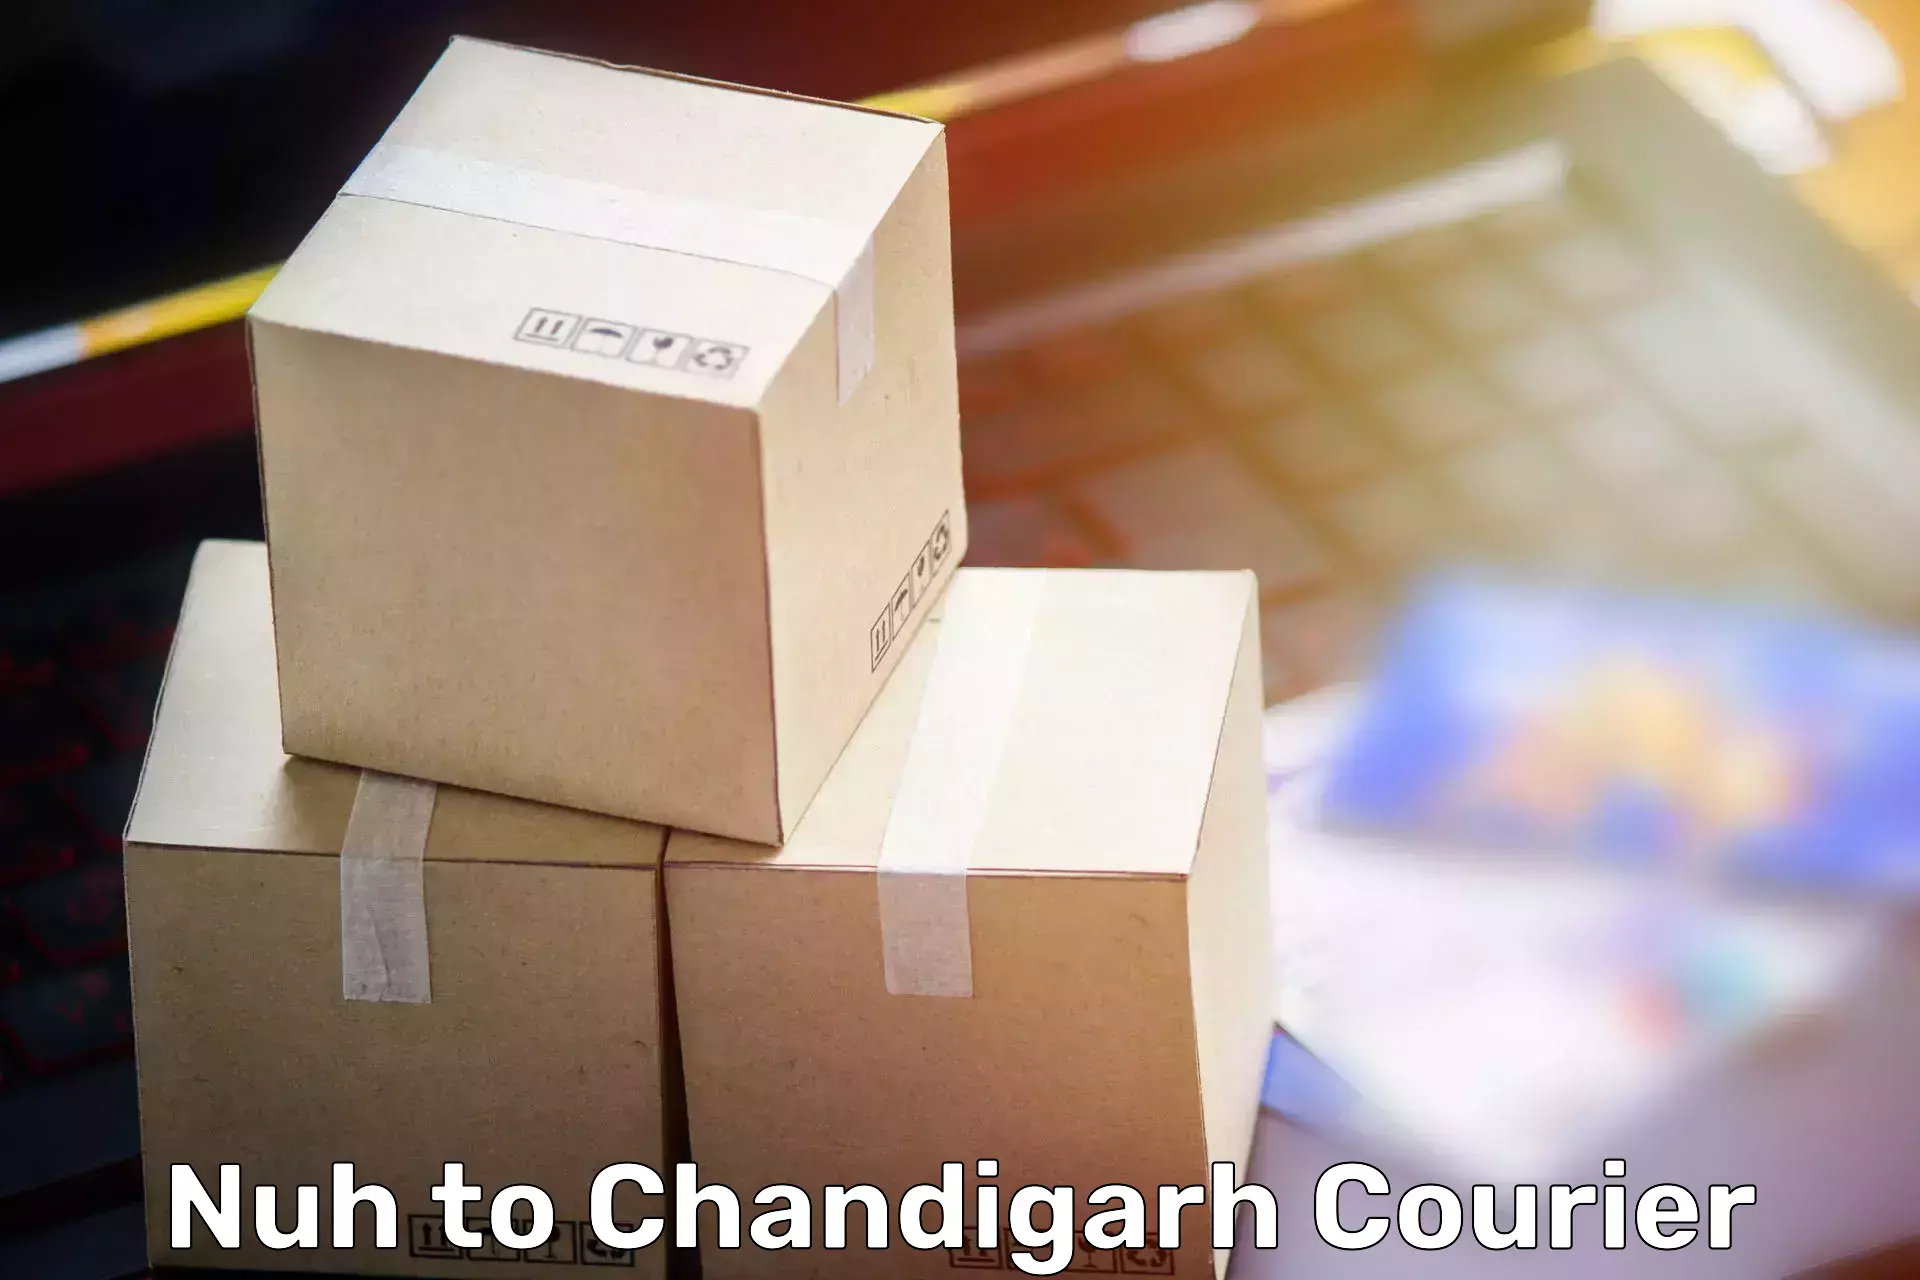 Furniture delivery service Nuh to Chandigarh